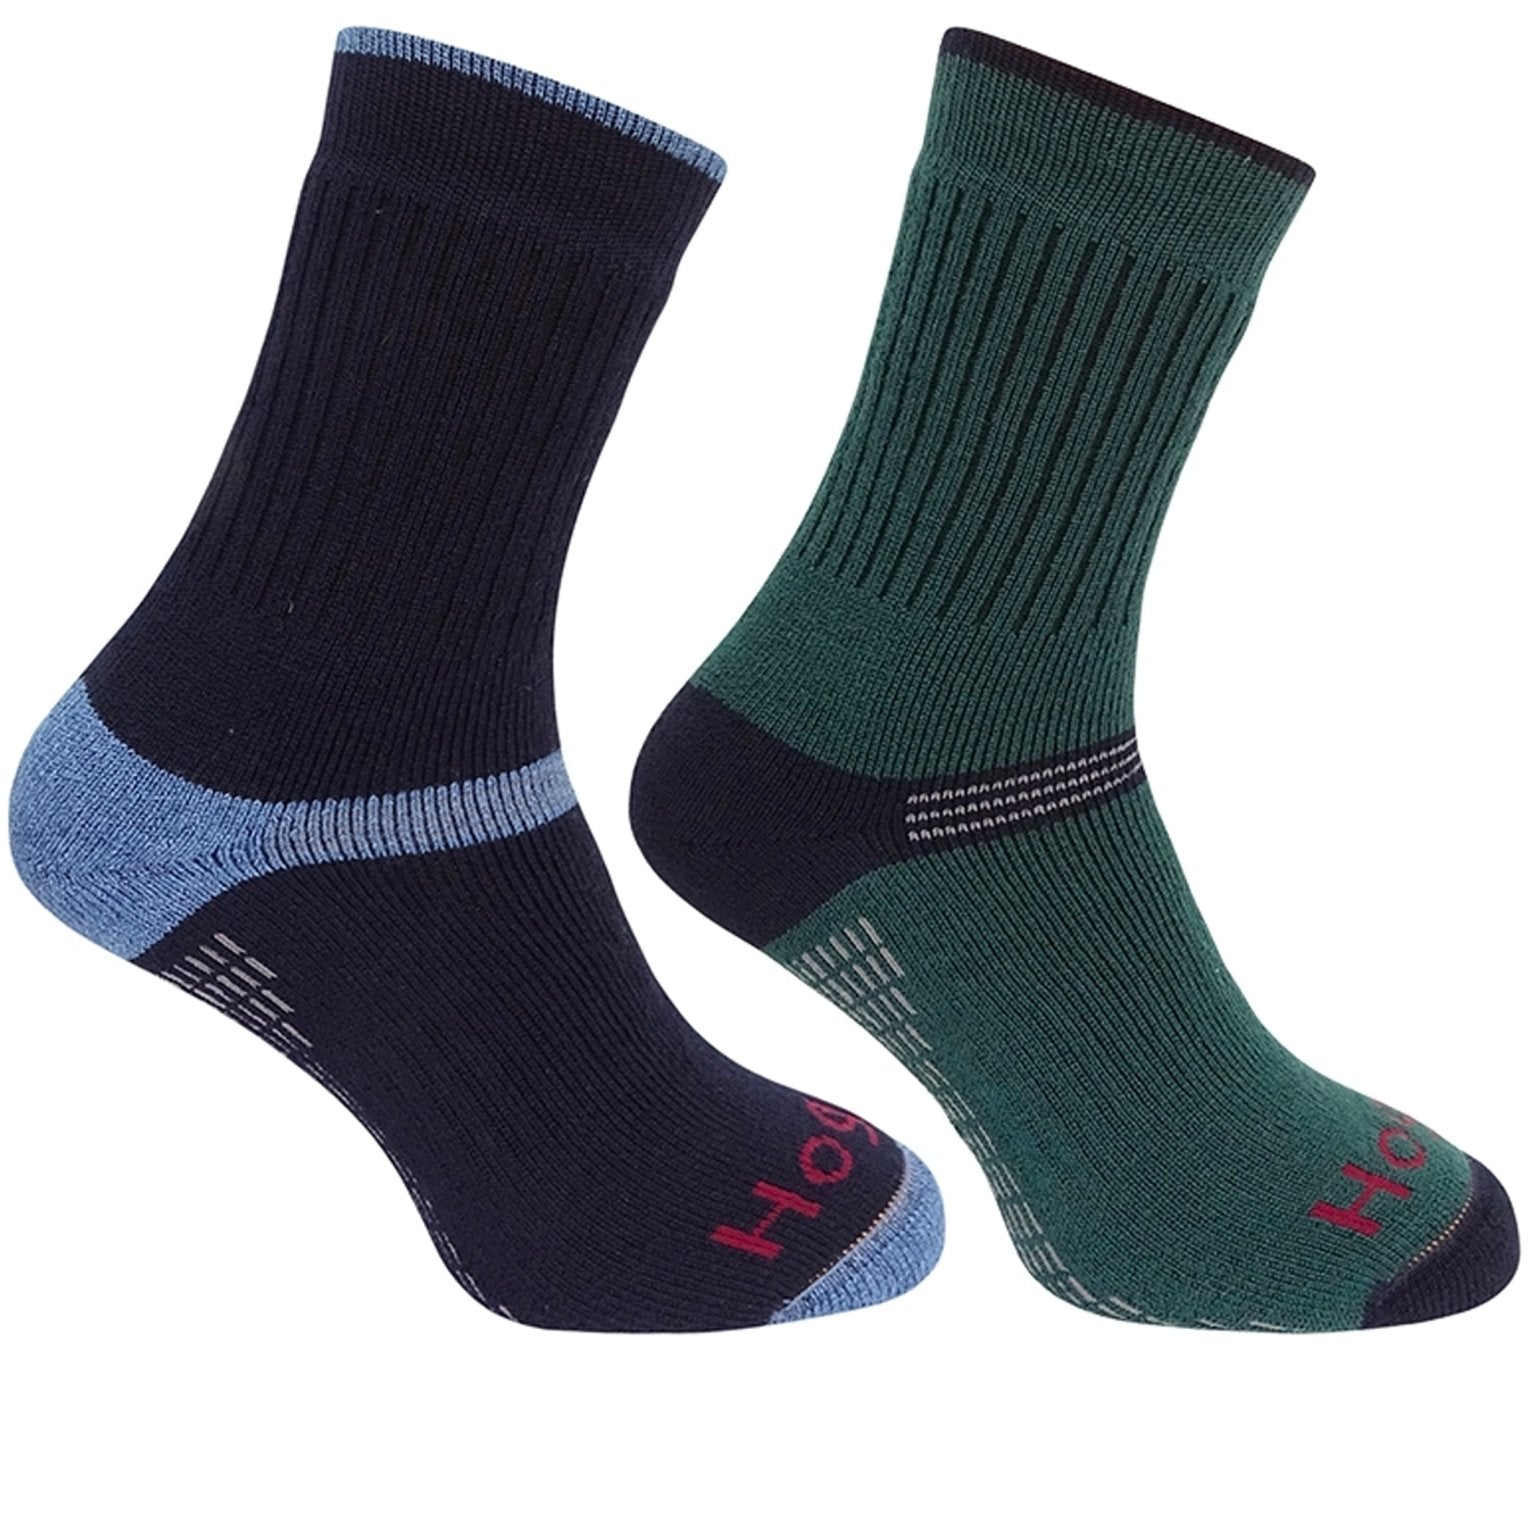 4elementsclothingHoggs of FifeHoggs of Fife - 1905 Mens Socks in Charcoal/Denim (Twin Pack) - Tech ActiveSocks1905/GN/1